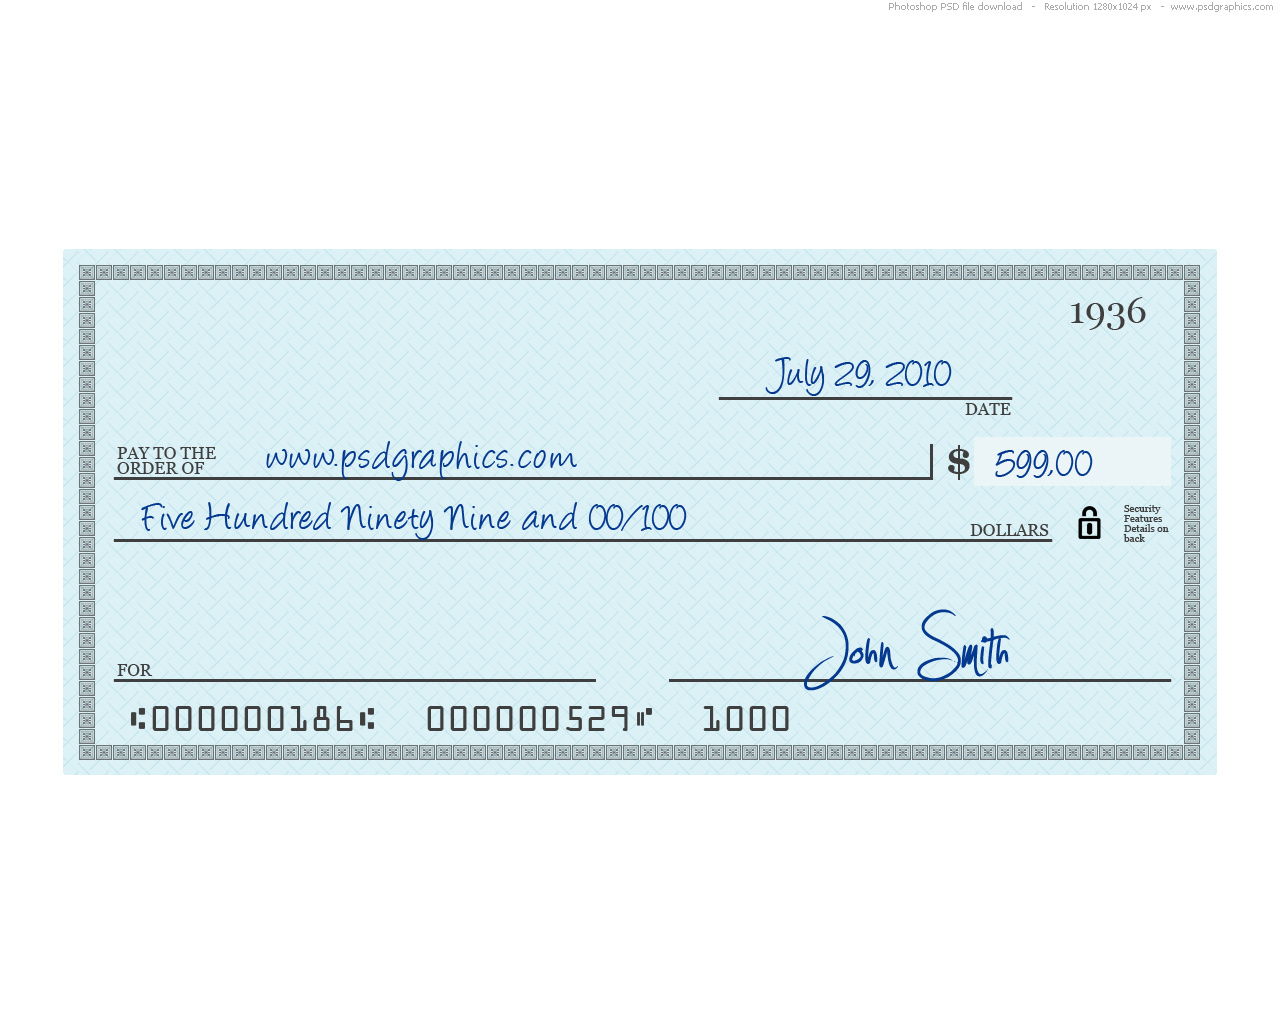 014 Free Blank Business Check Template Good Of Dummy Cheque Within Blank Cheque Template Download Free